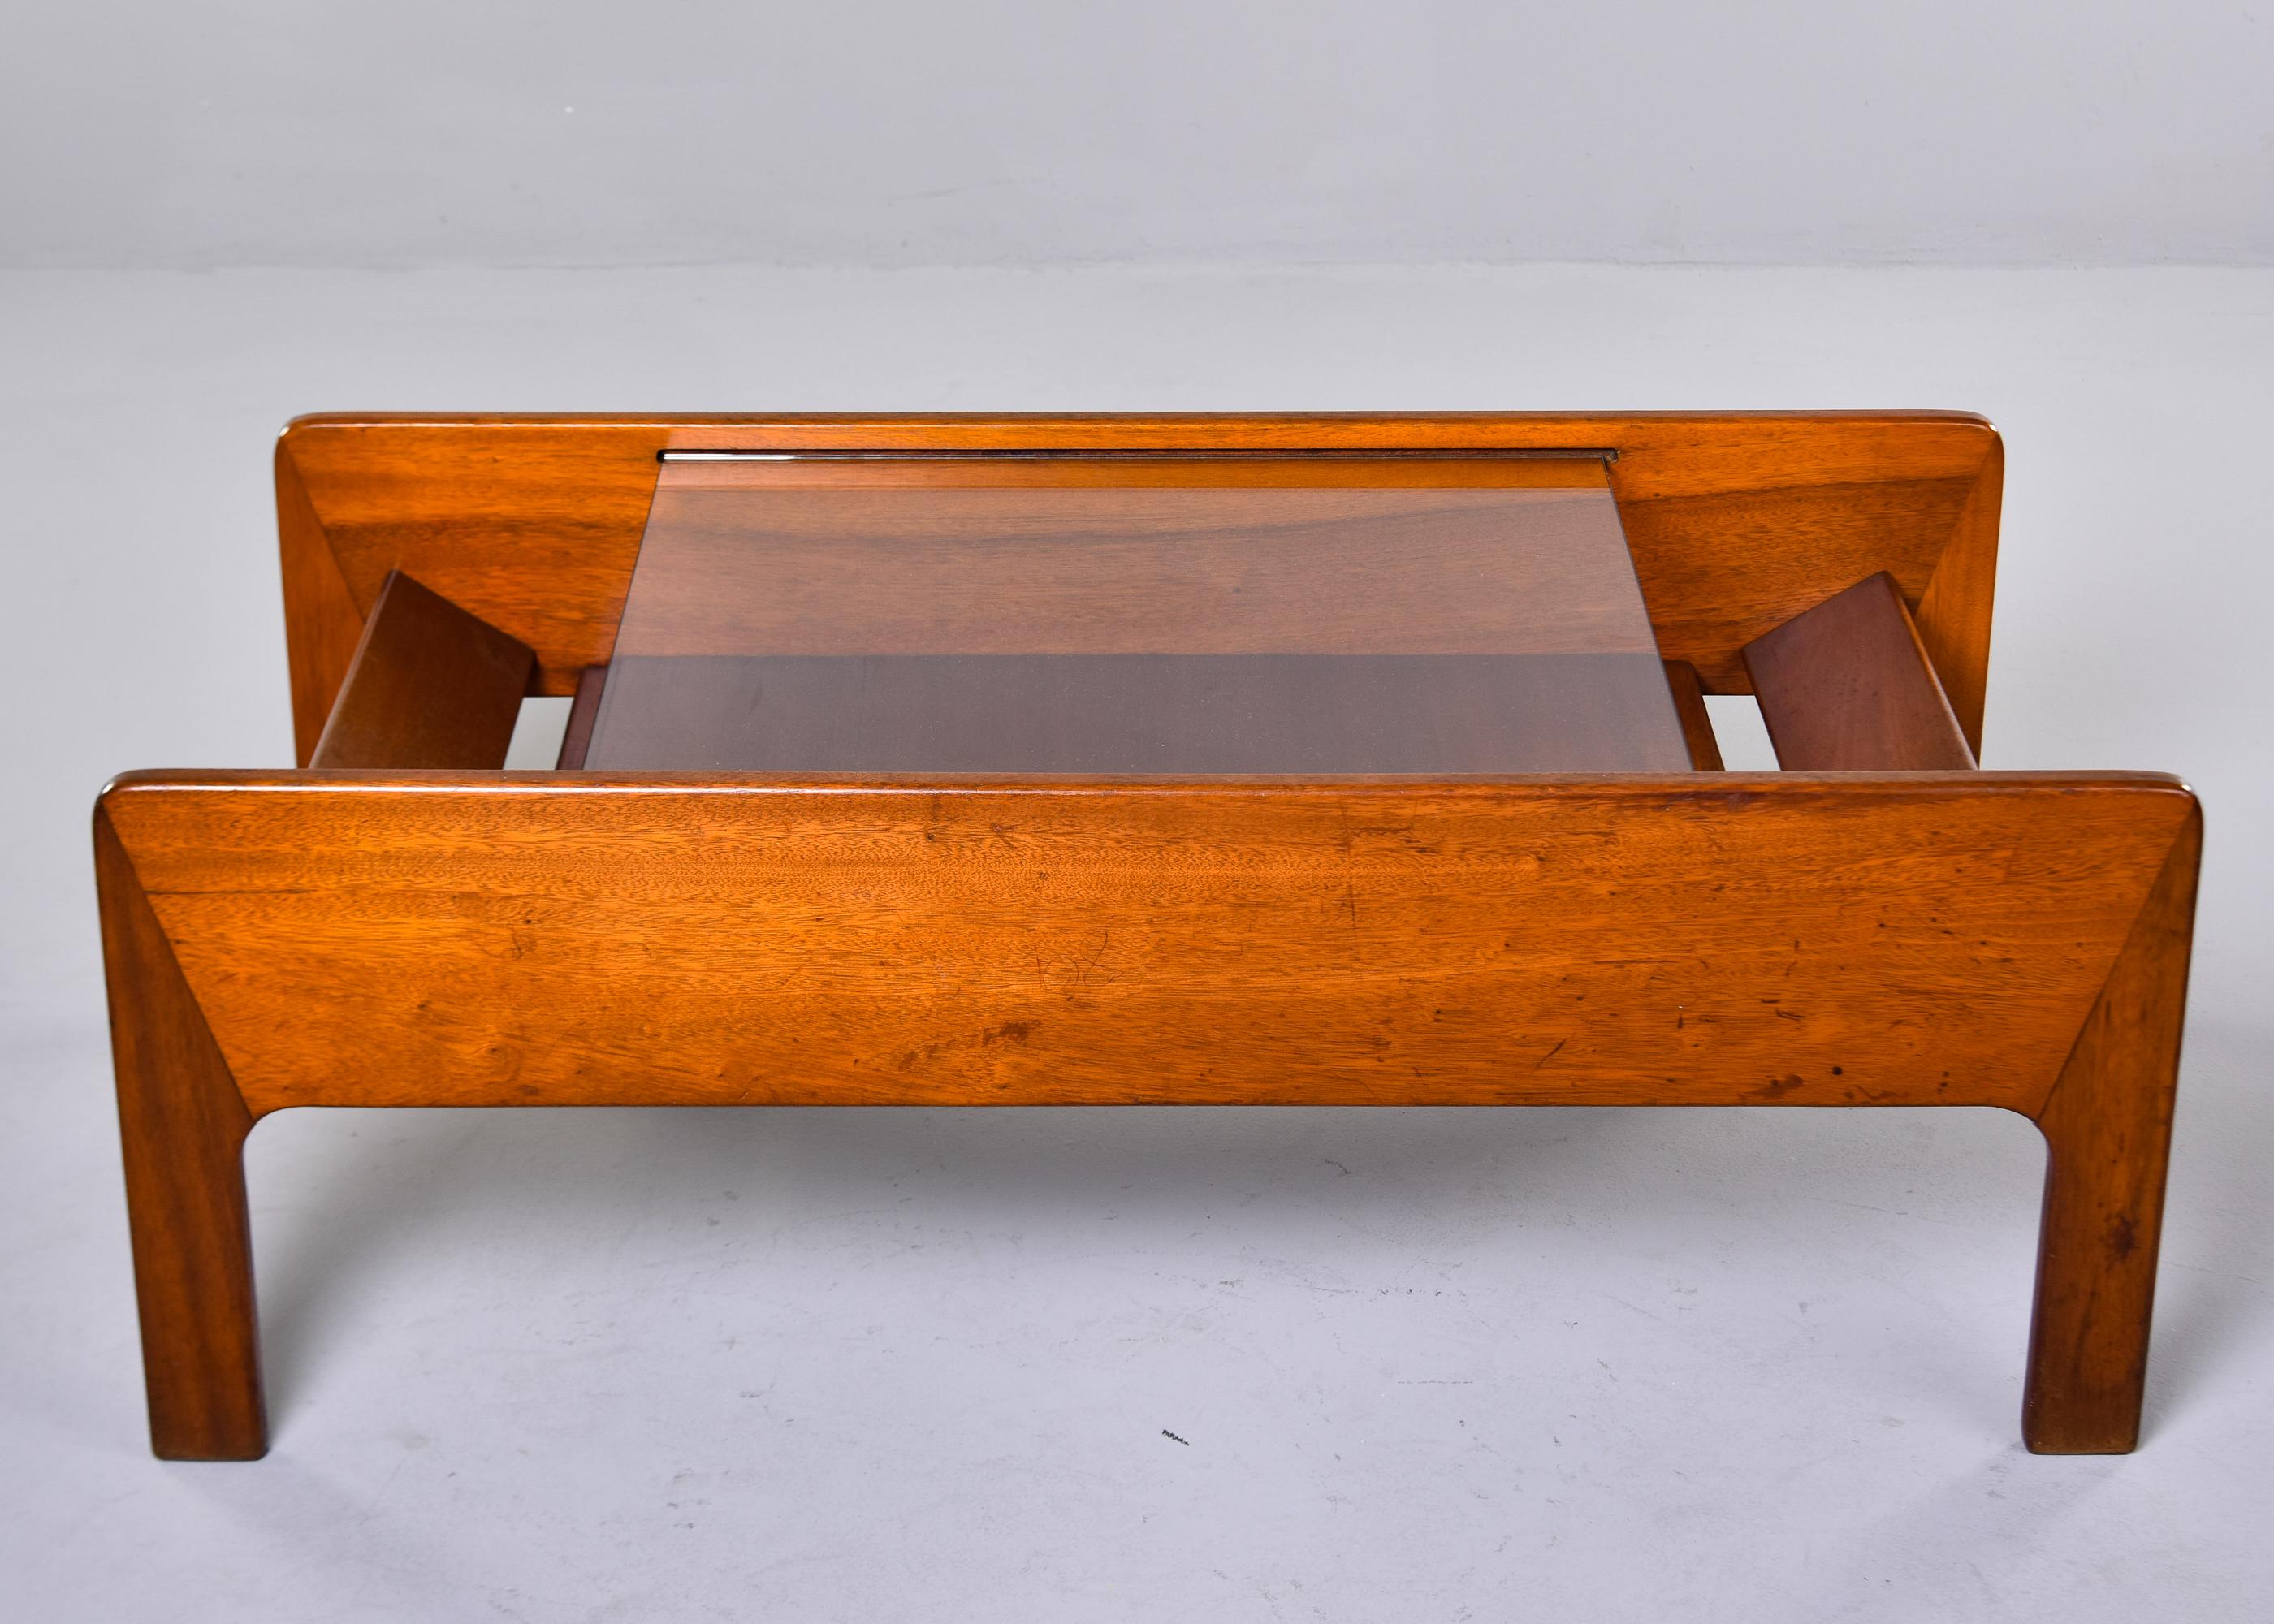 French Midcentury Coffee Table with Insert Glass Top In Good Condition For Sale In Troy, MI